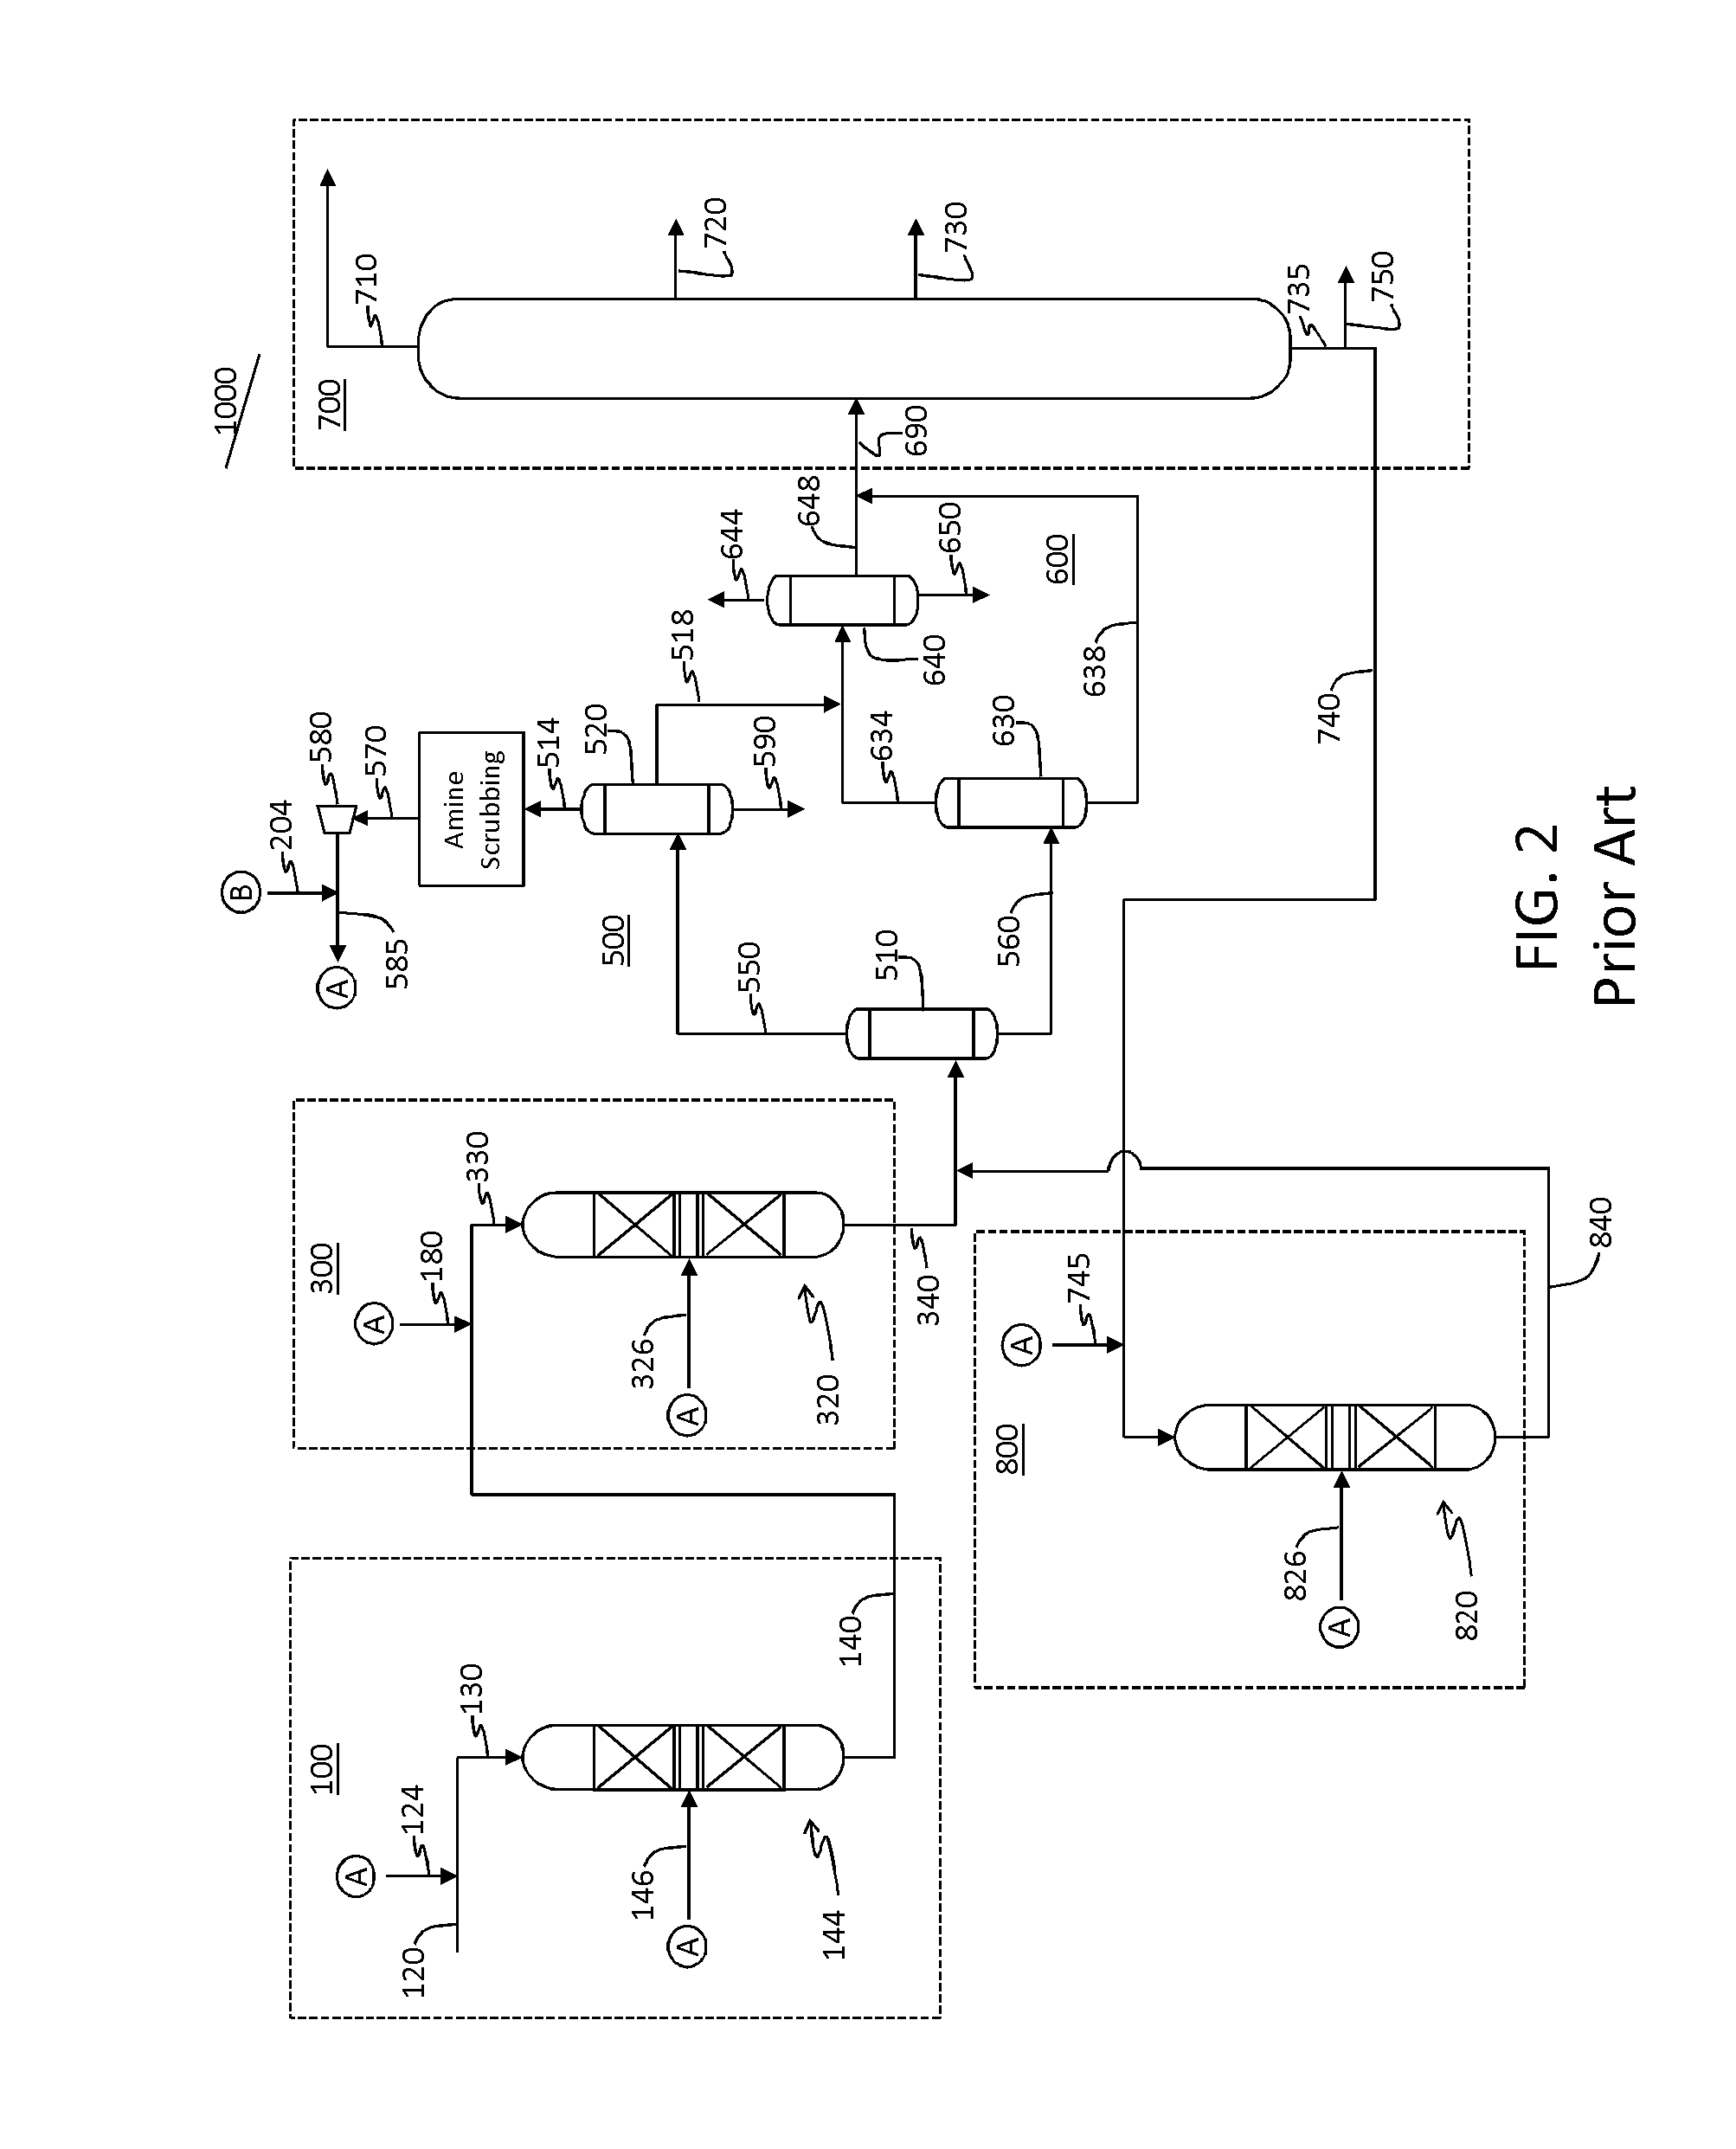 Hydrocracking process with integral intermediate hydrogen separation and purification